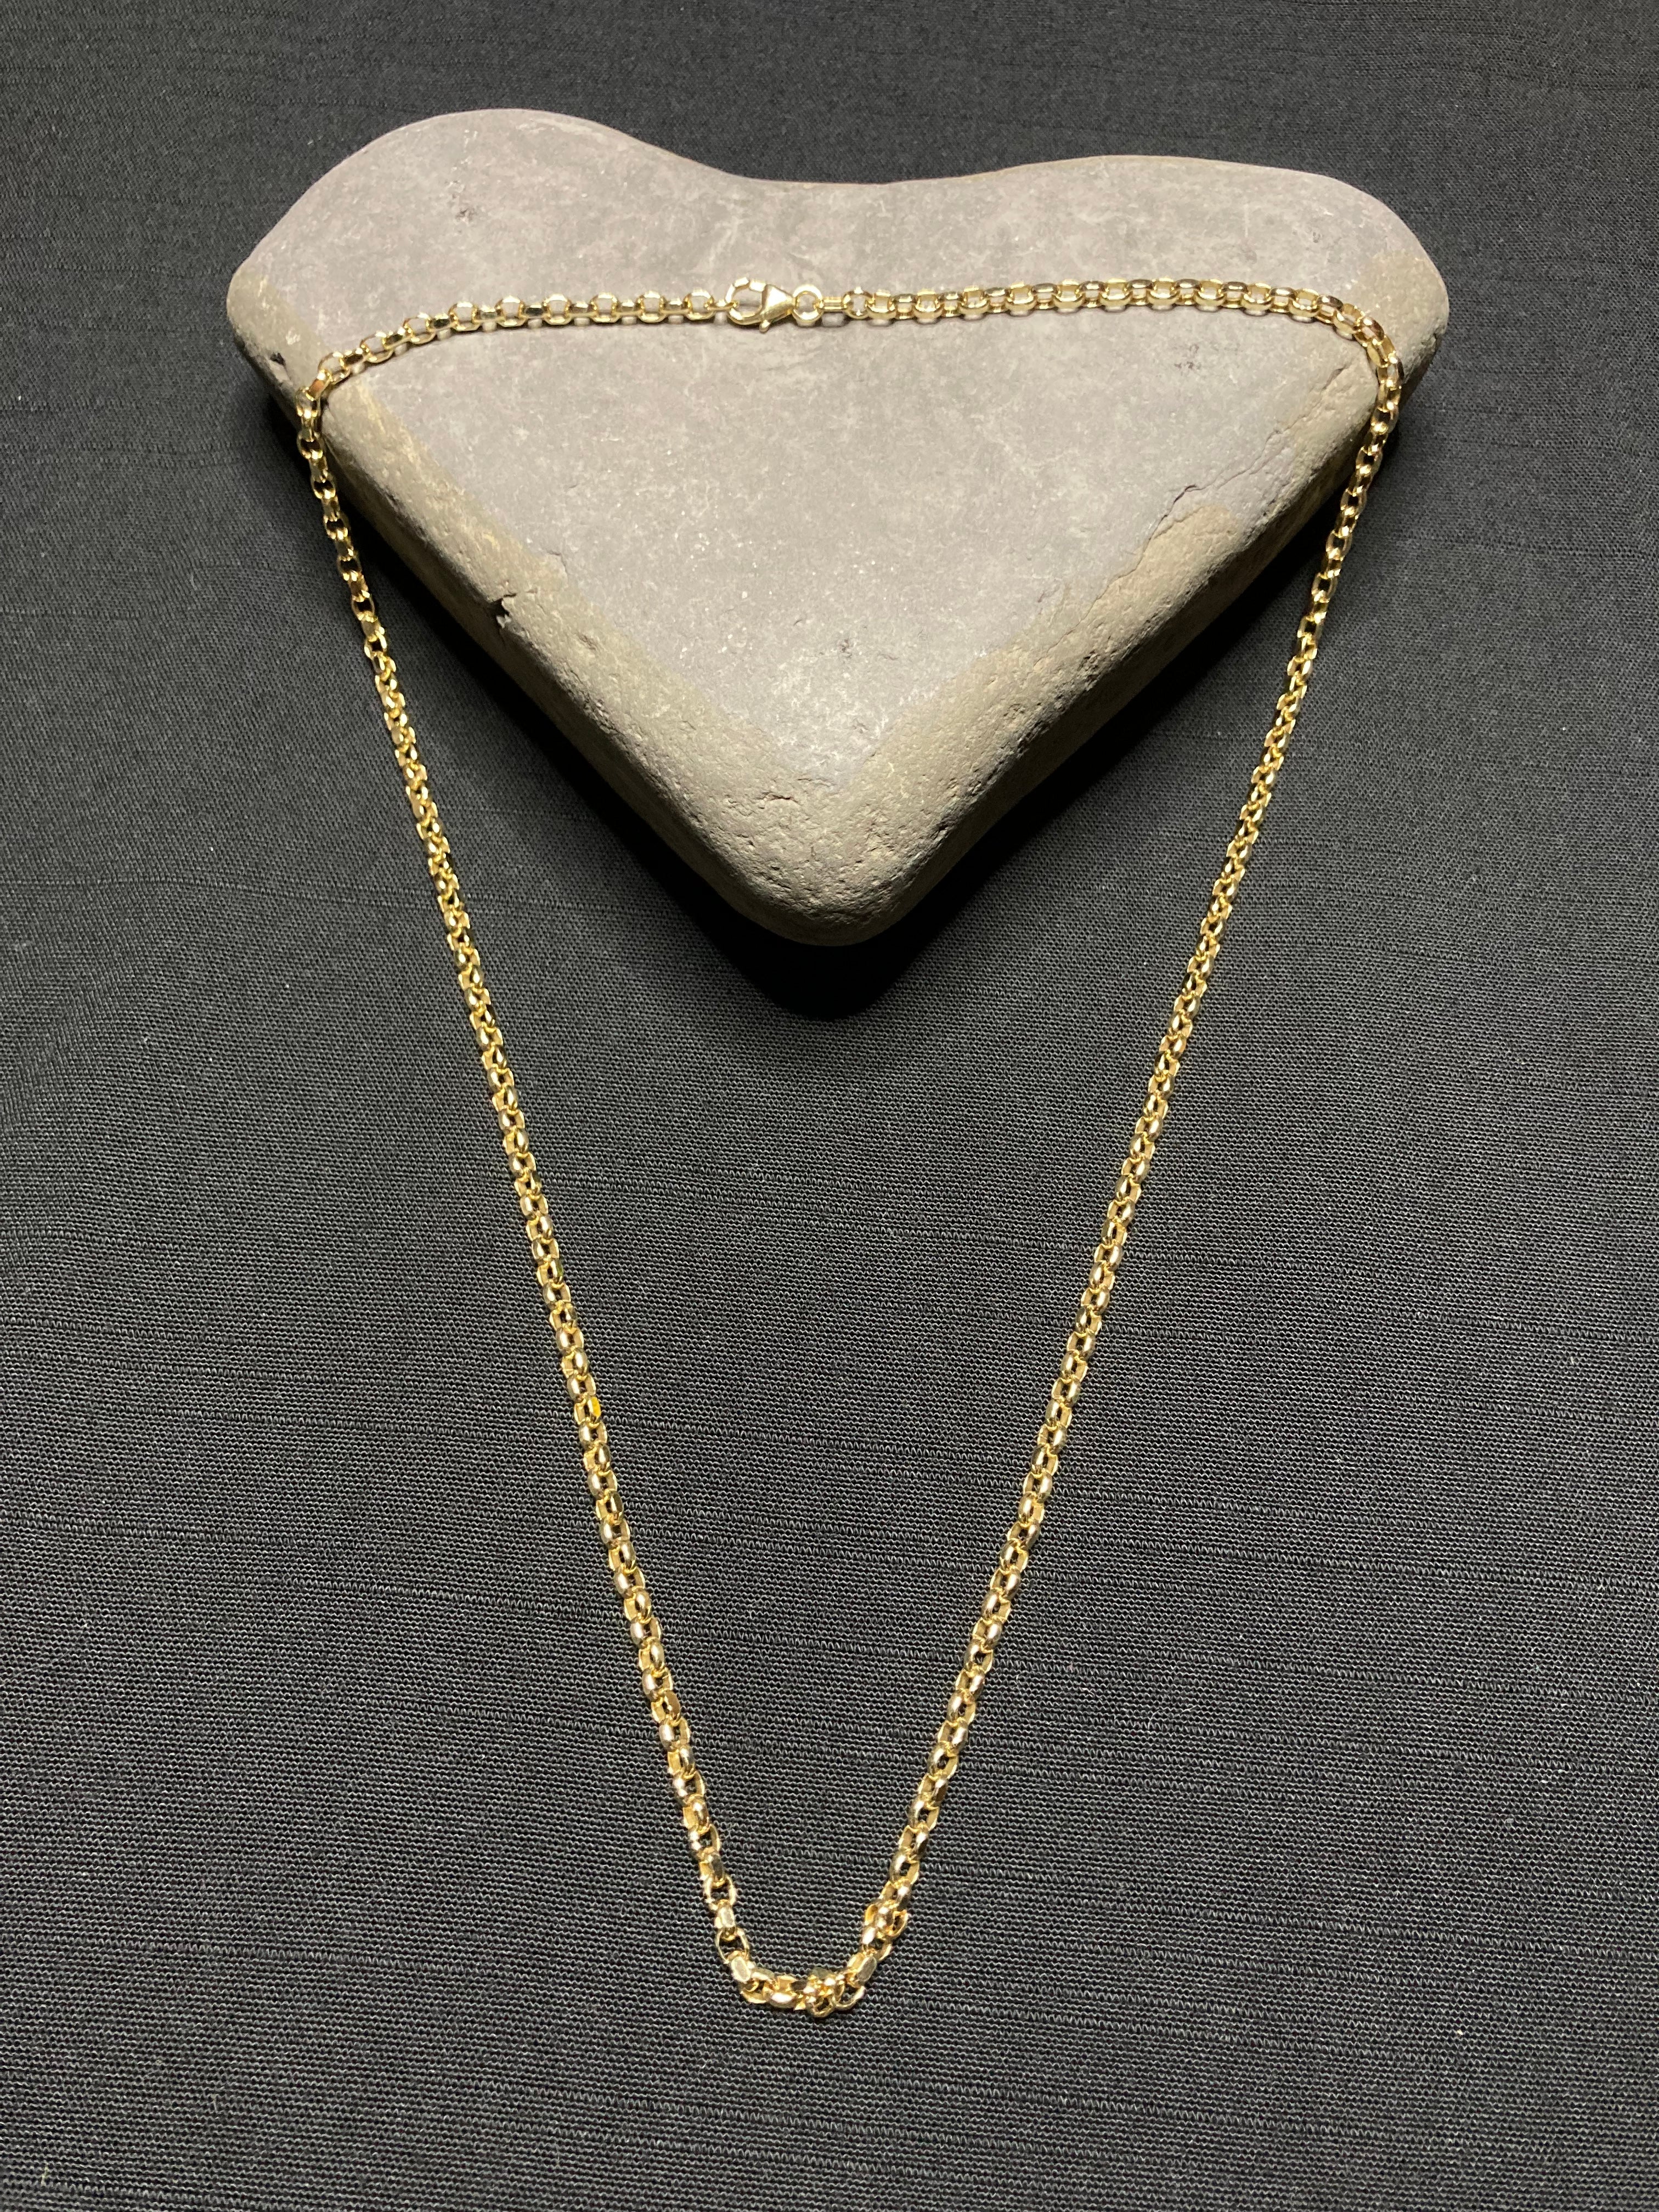 9ct Yellow gold Necklace. 20" diamond cut belcher link with trigger clasp